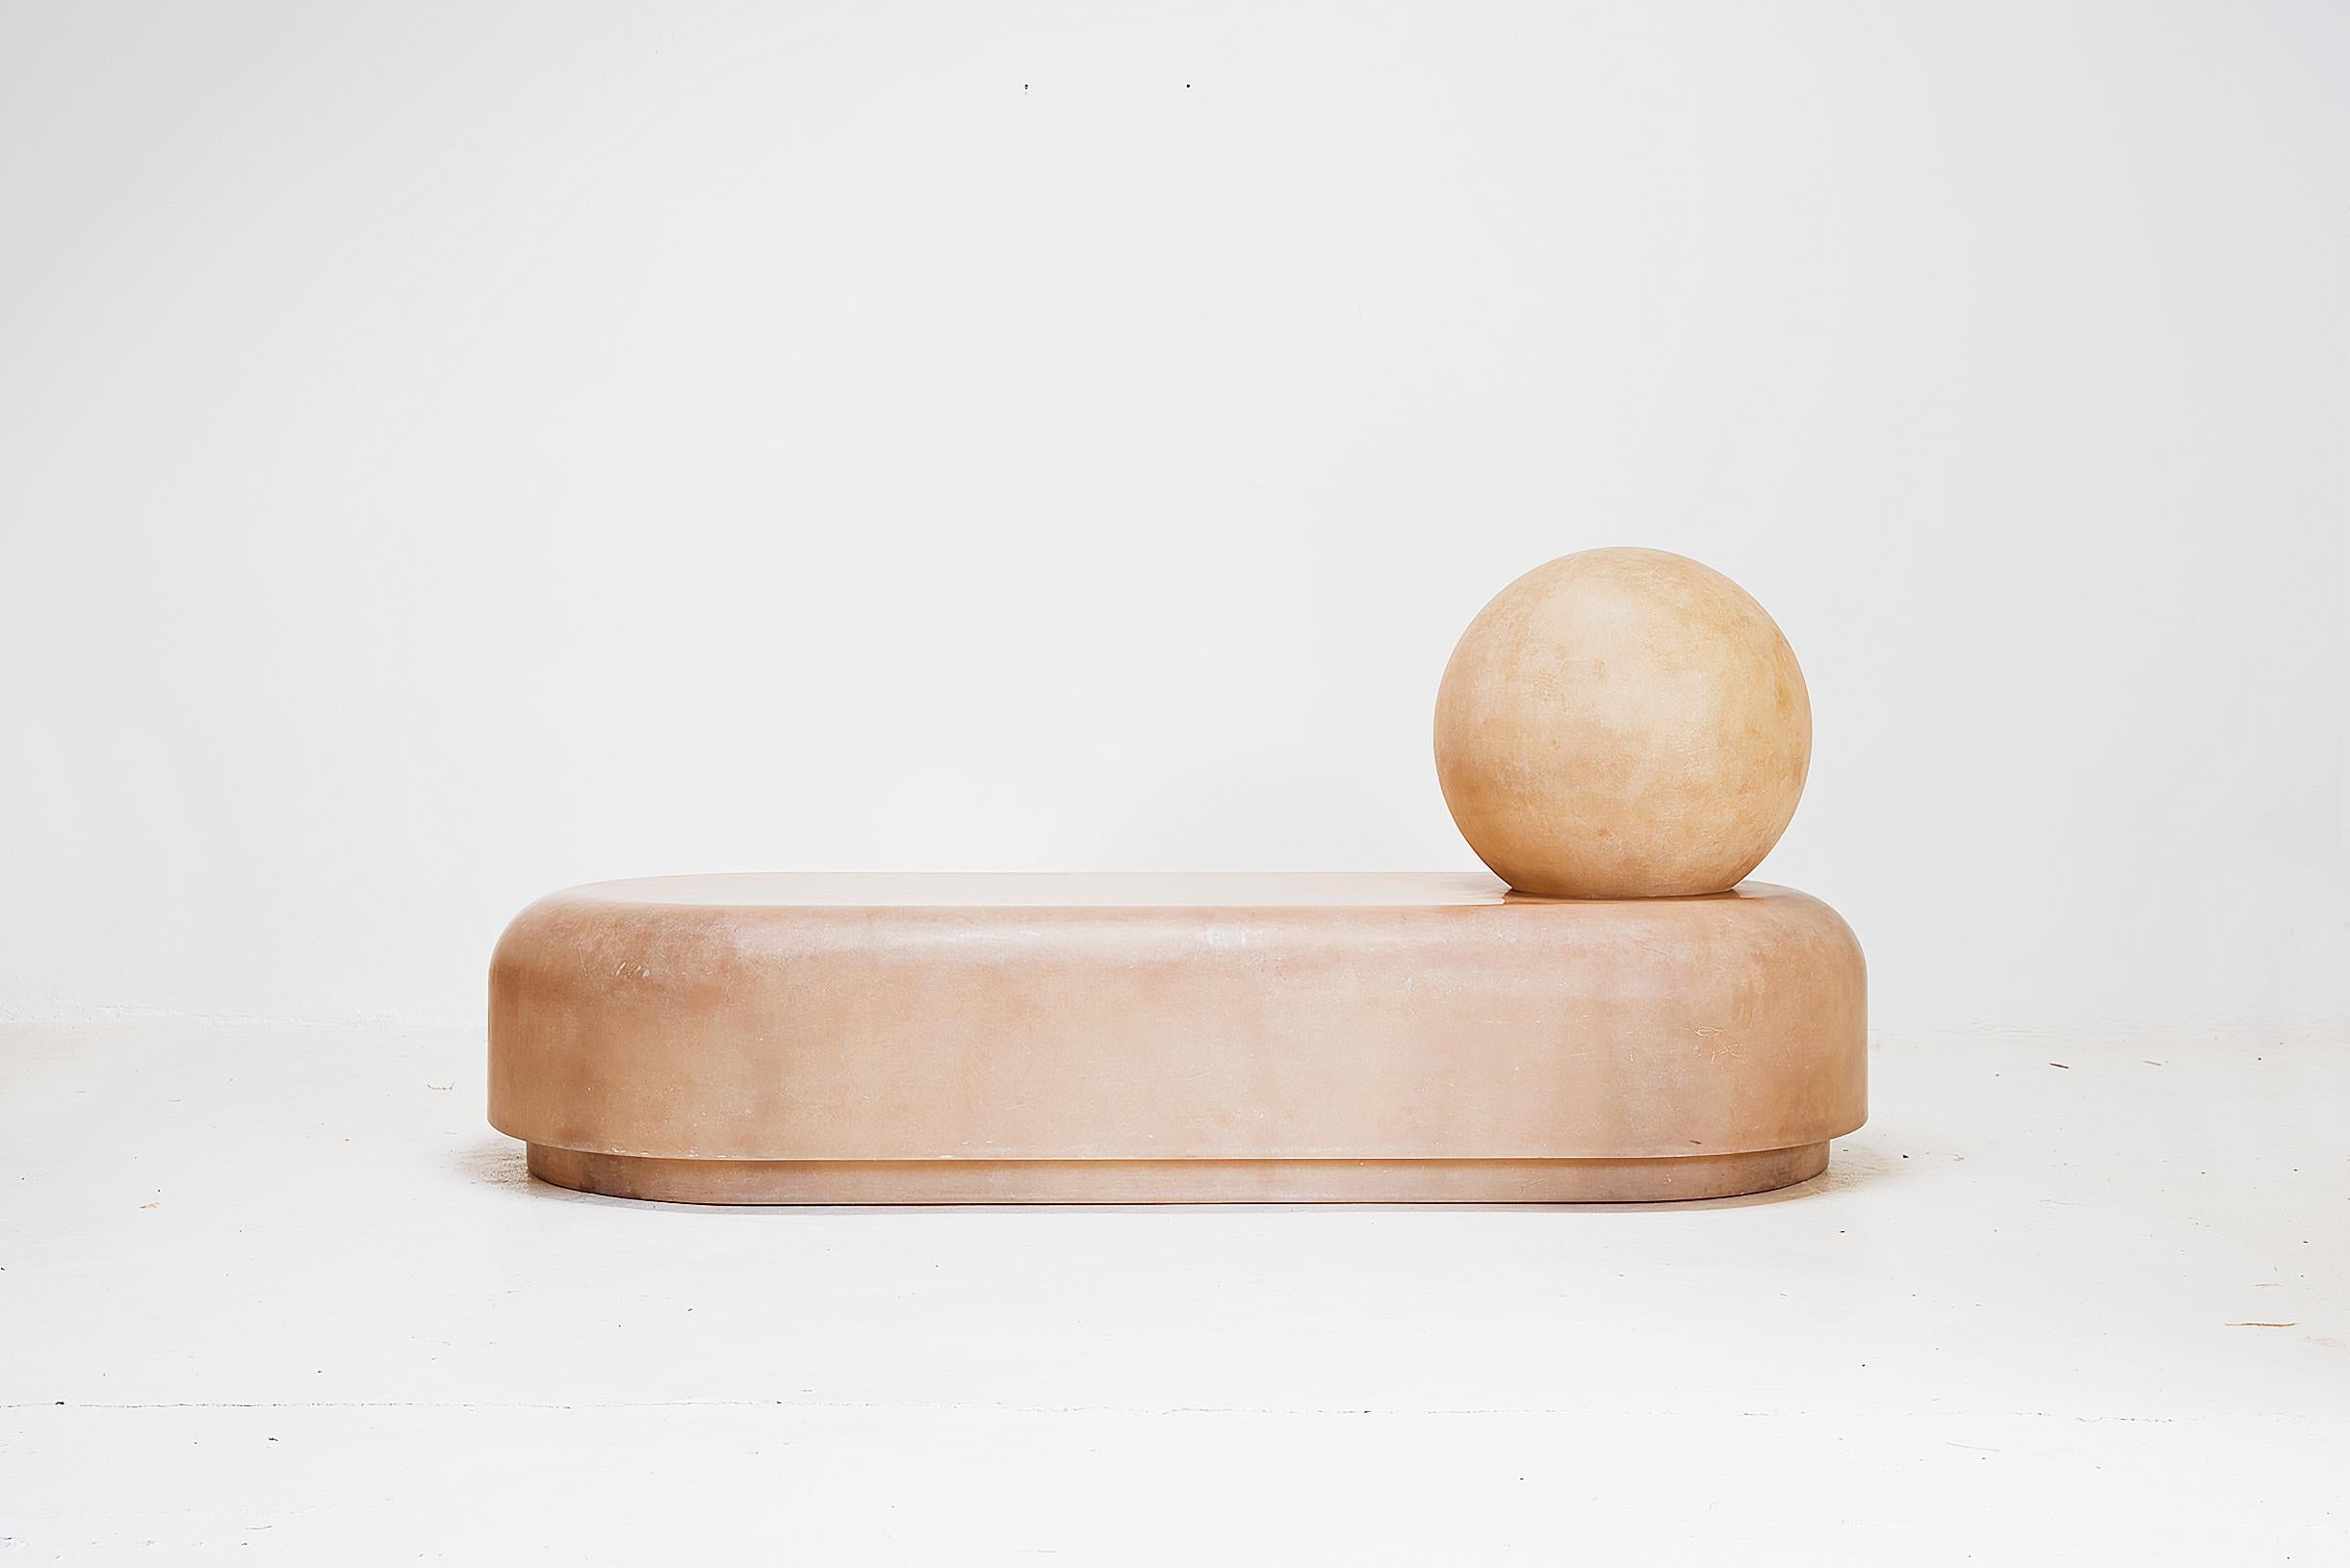 In a translucent fibreglass that appears almost faded, this rounded two-piece daybed comprises a spherical headrest and tablet-like body, both formed from glossy fibreglass.
Fibreglass.
Measures: 90cm high x 85cm deep x 200cm wide
35.43in x 33.46in